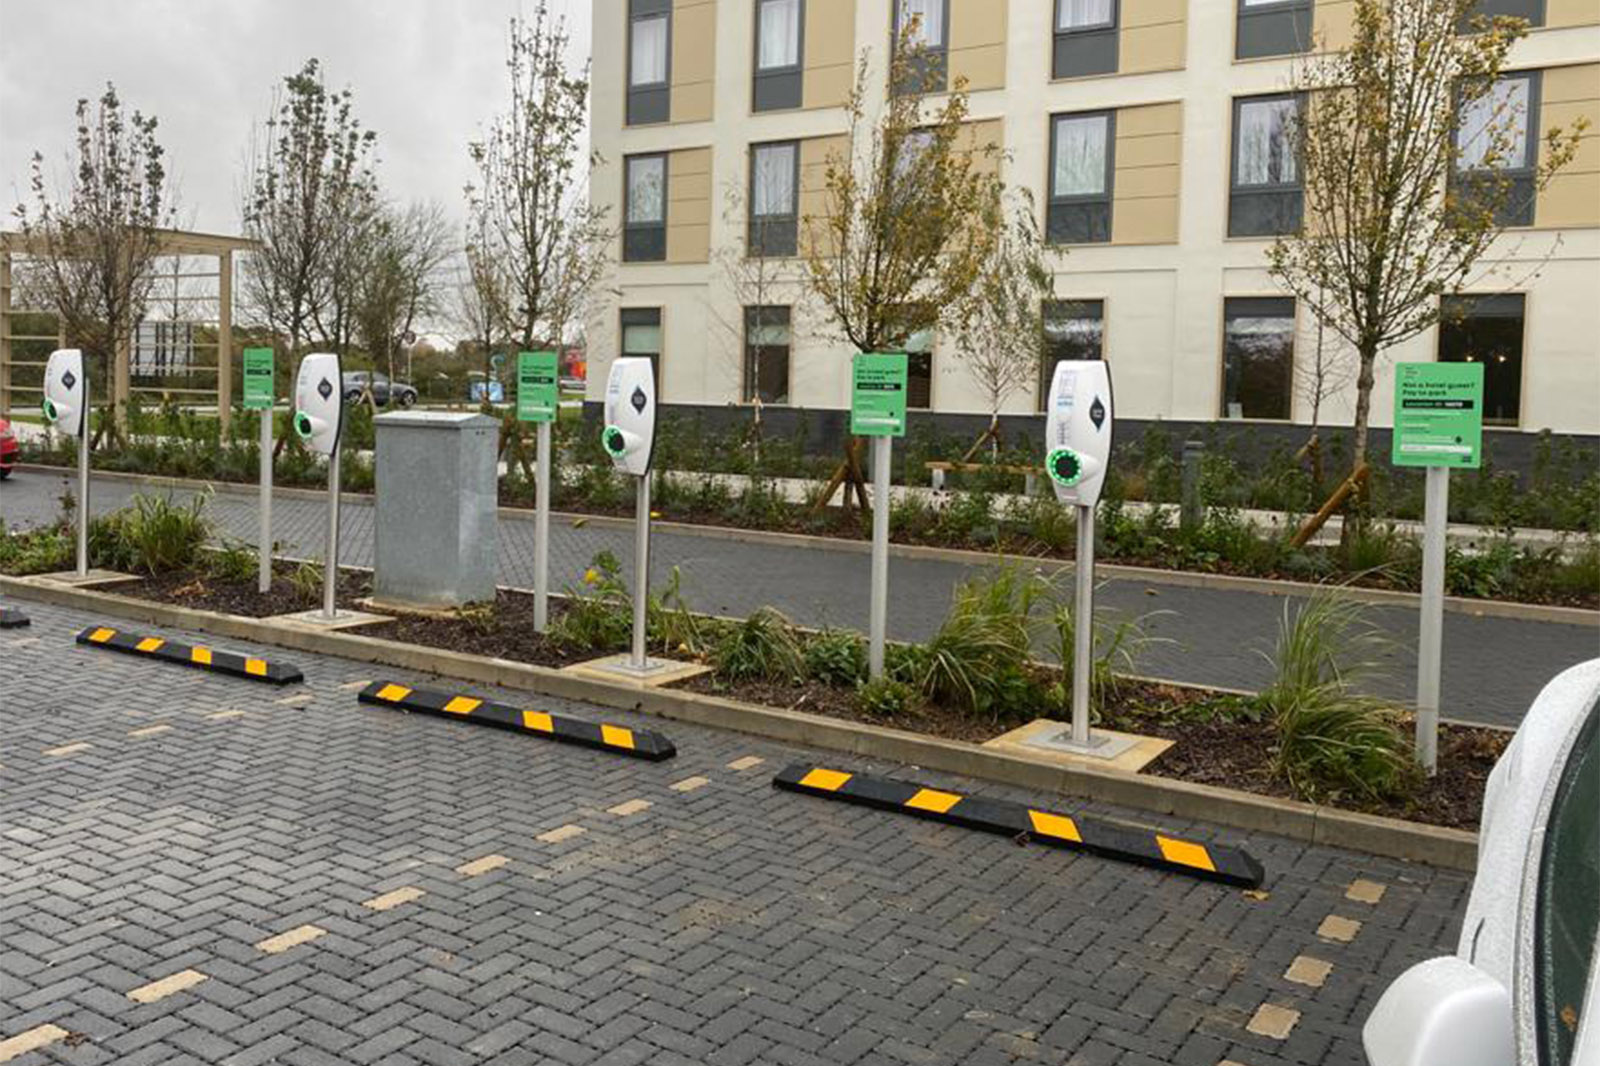 Online parking service introduces prebookable EV chargers in UK Autocar